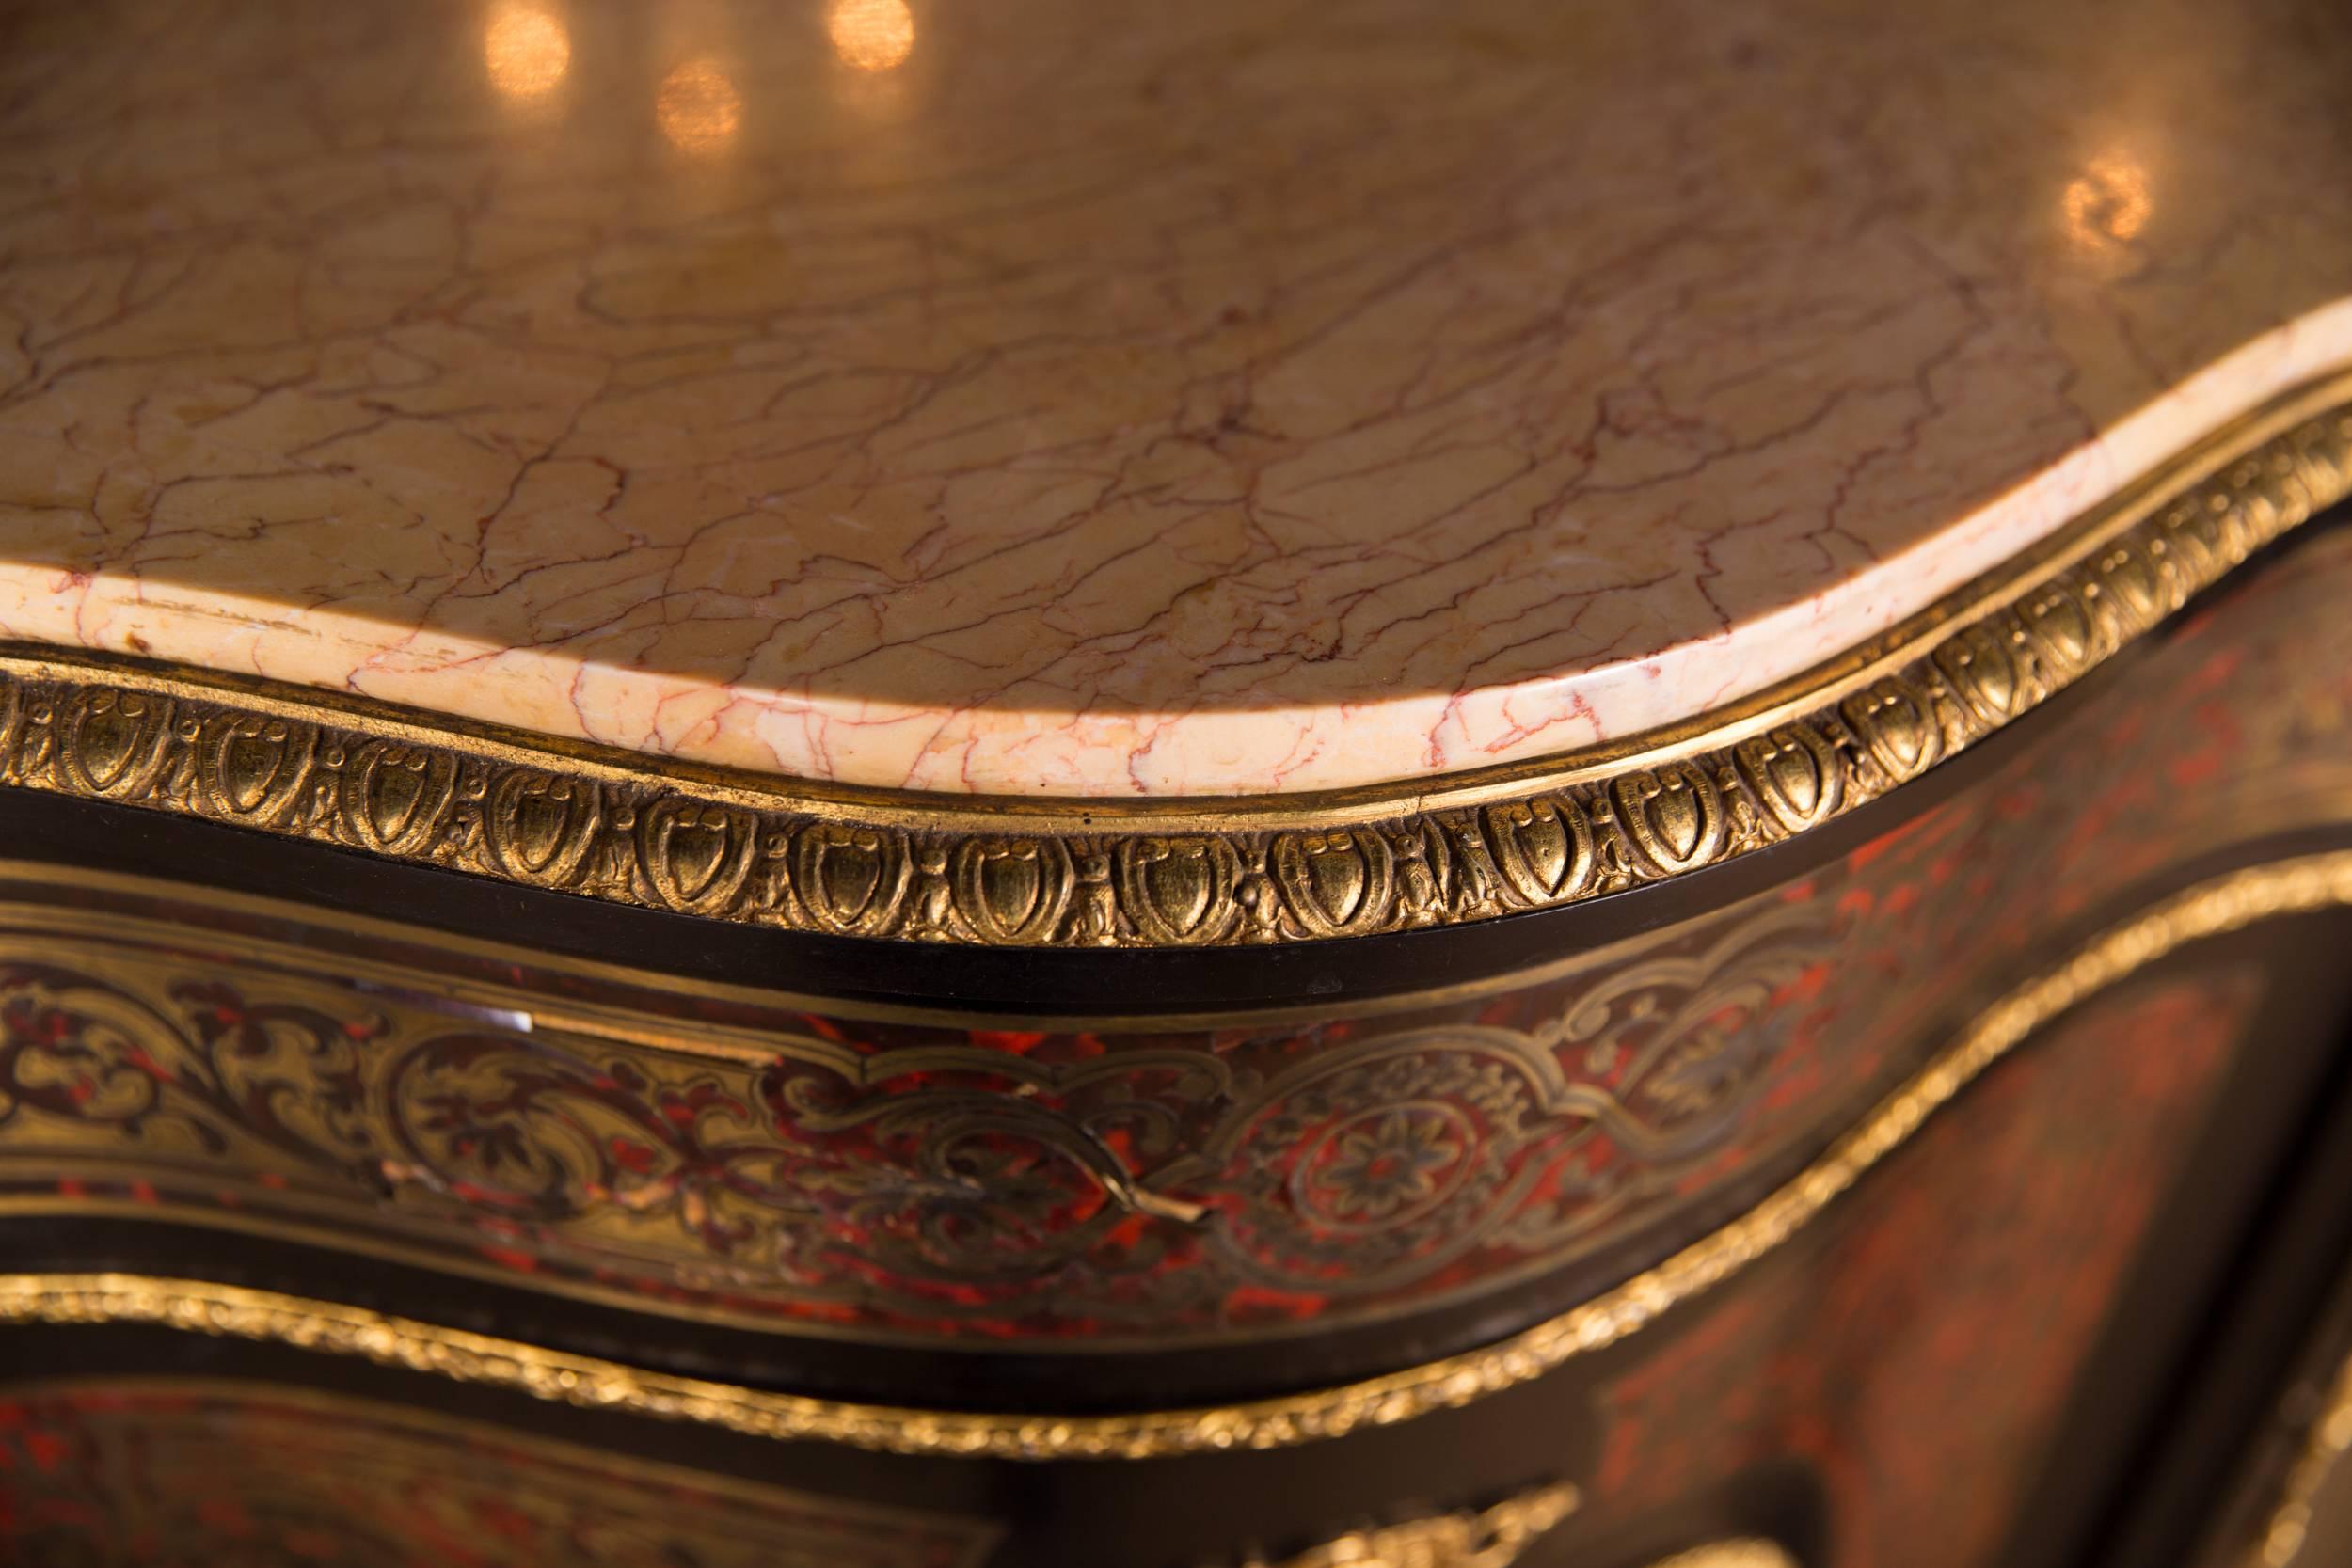 19th Century Original French Boulle Commode in the Louis XV Style 1860 (Buchenholz)